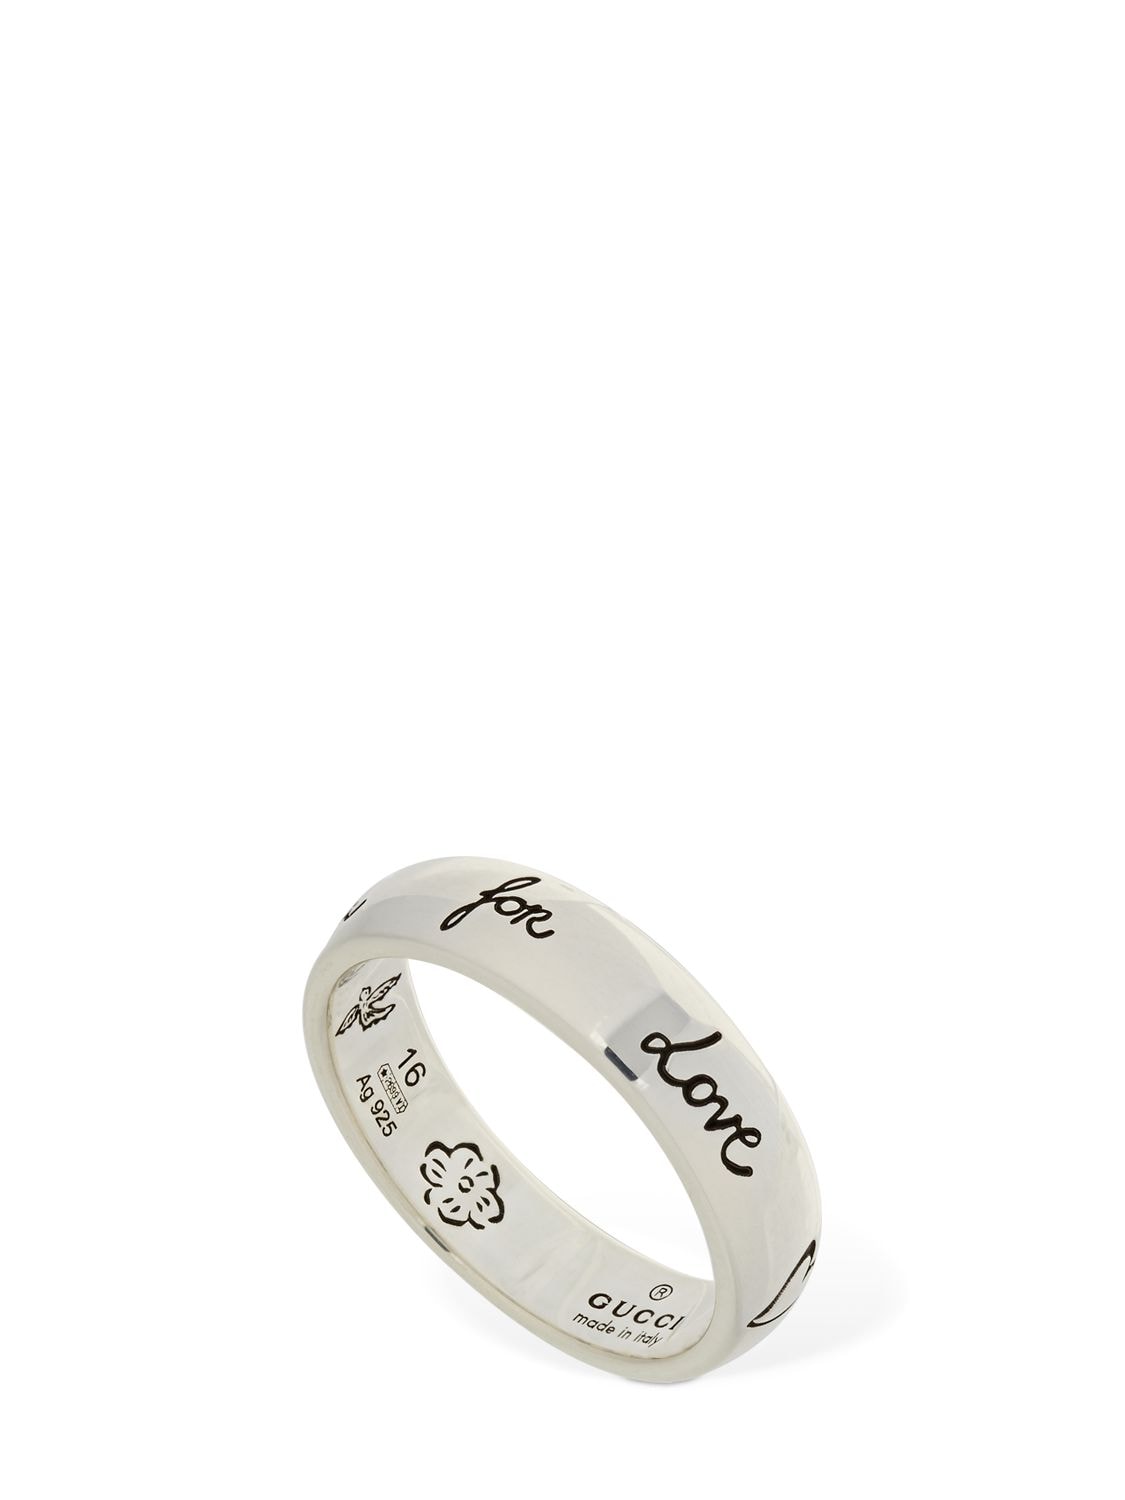 Blind For Love 5mm Sterling Silver Band Ring In Black,silver Tone